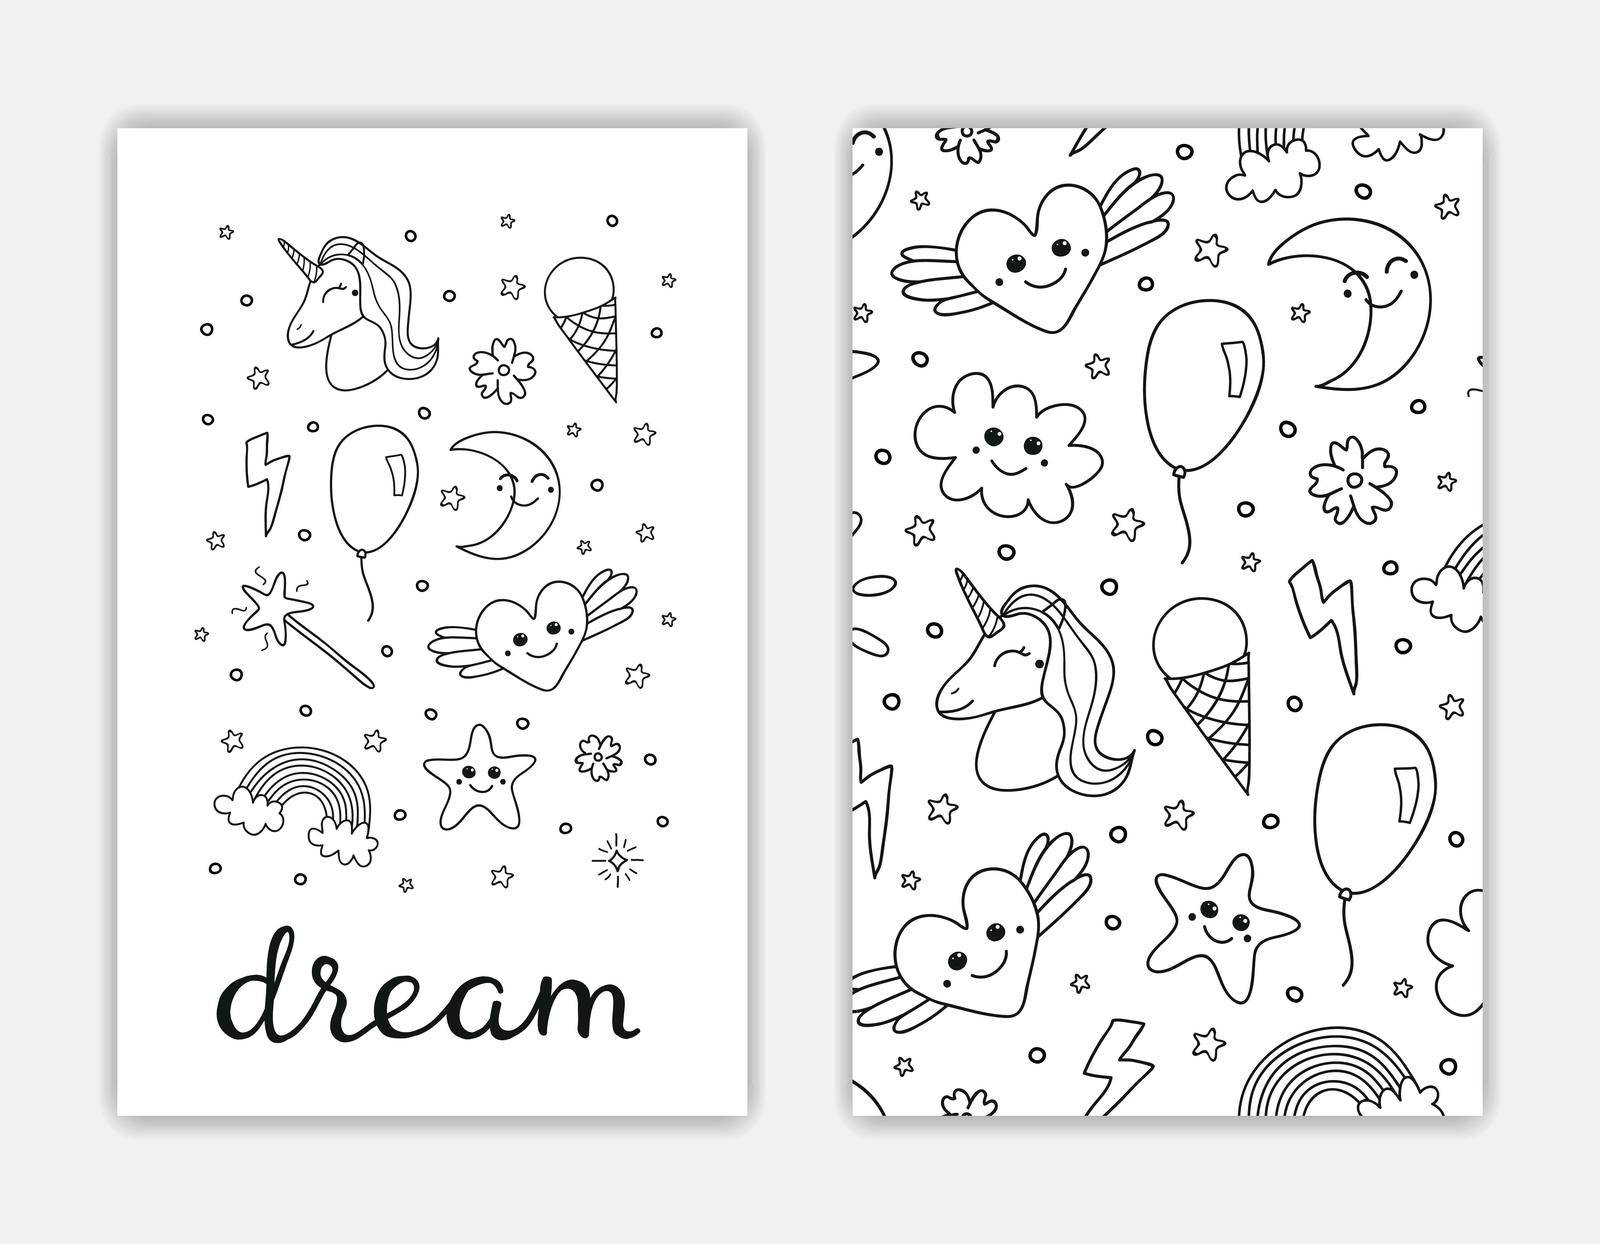 Card templates with hand drawn outline cute items and lettering. Used clipping mask.